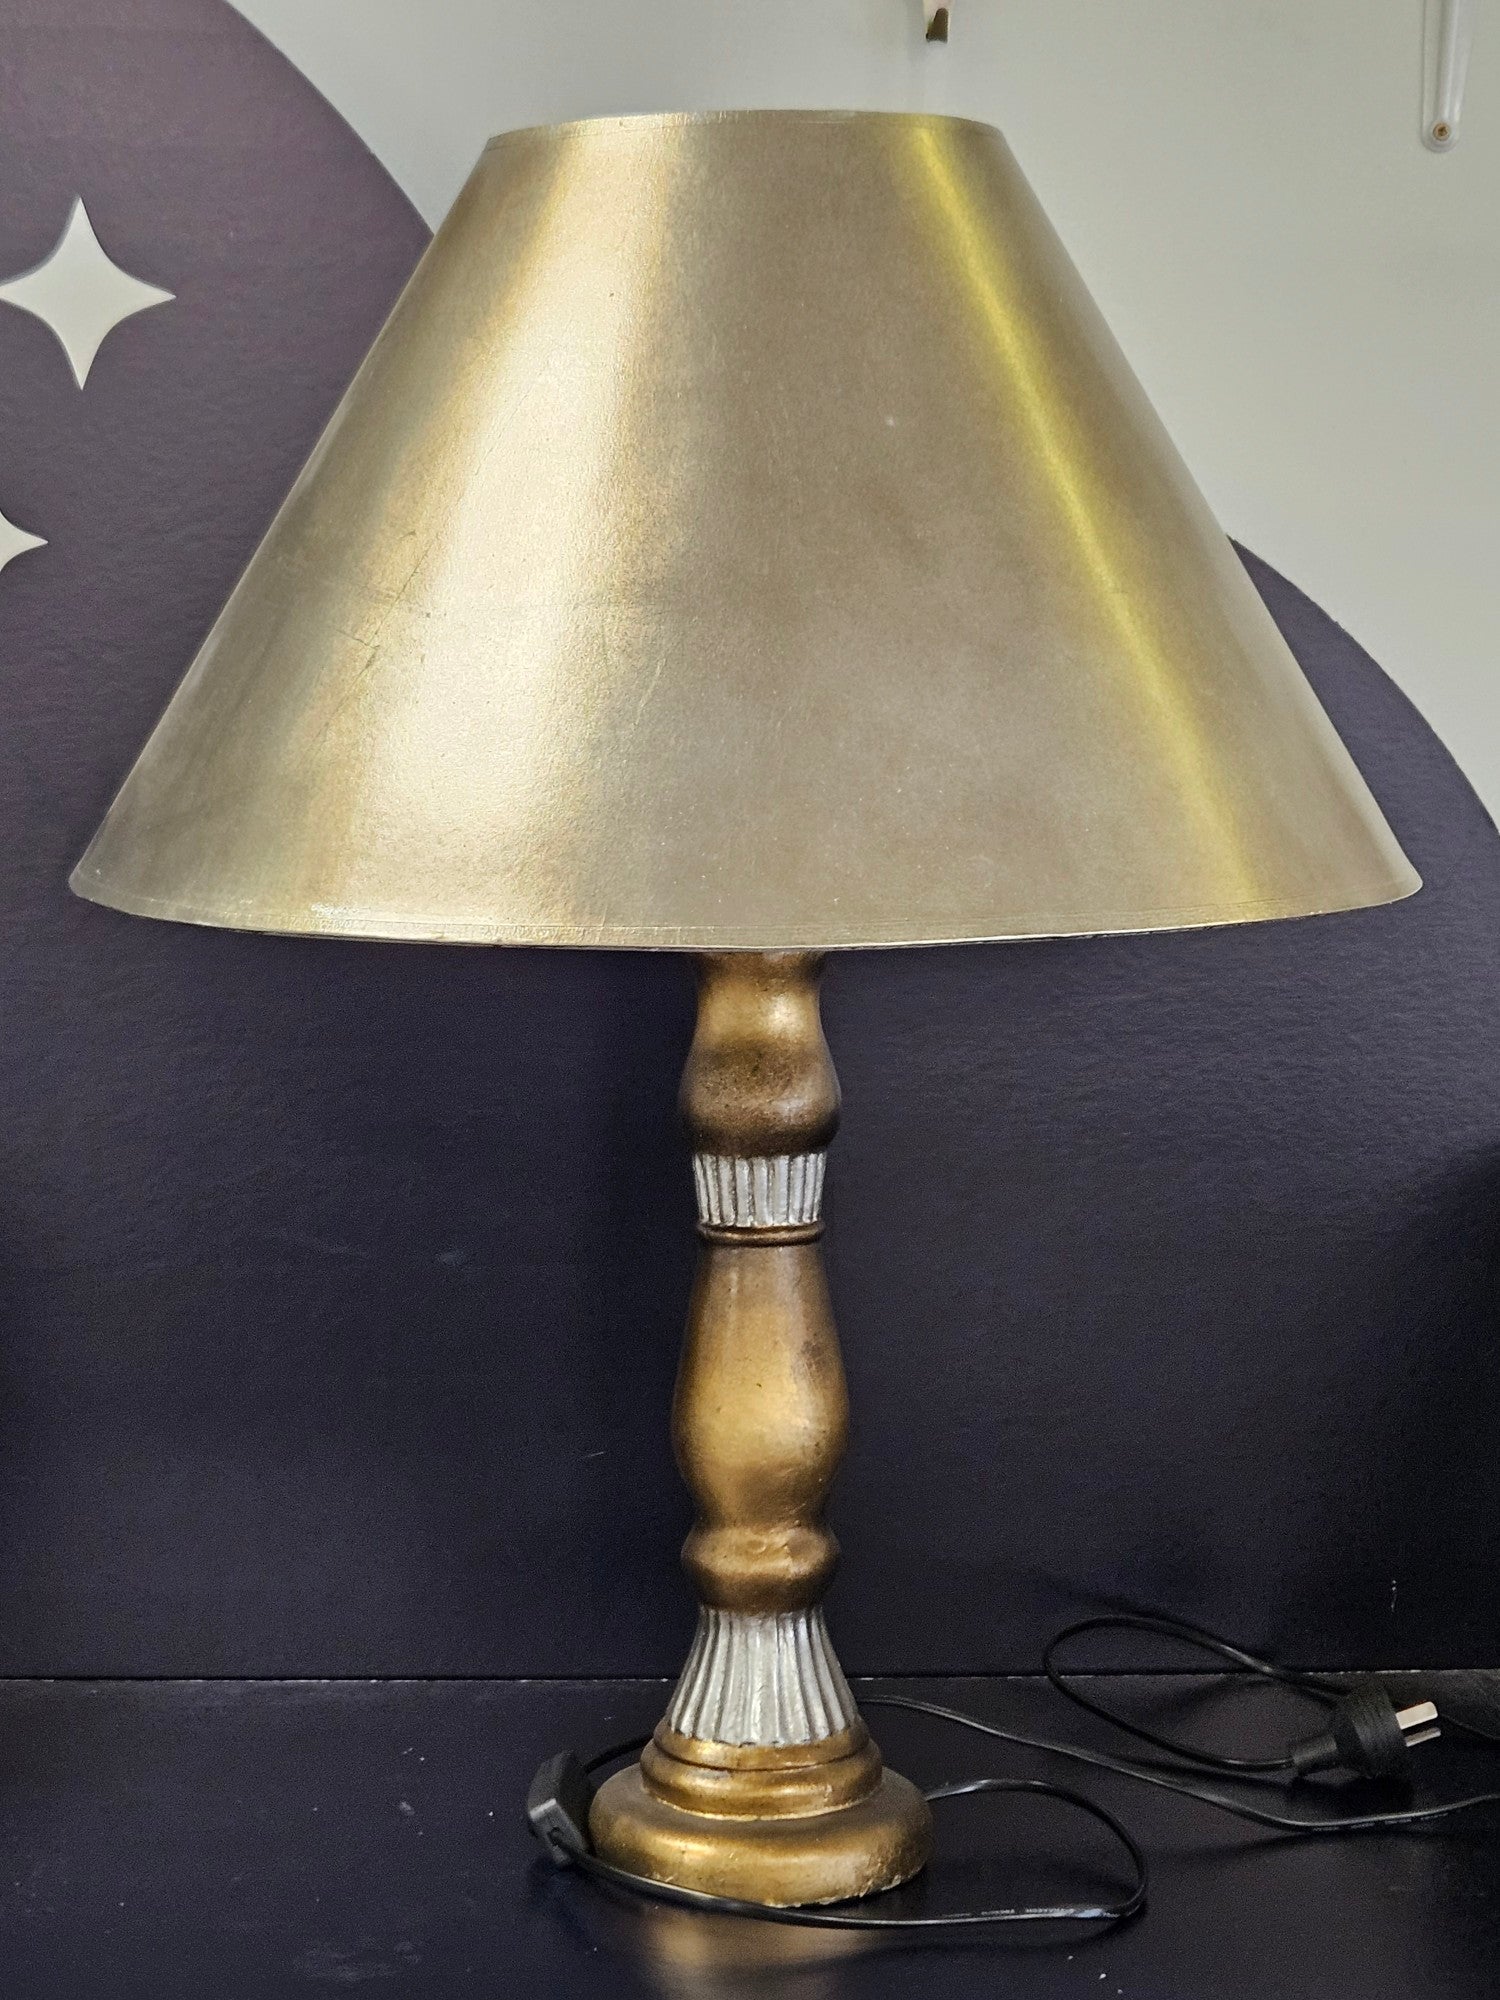 Burnished Gold Lamp & Shade - YS2000206